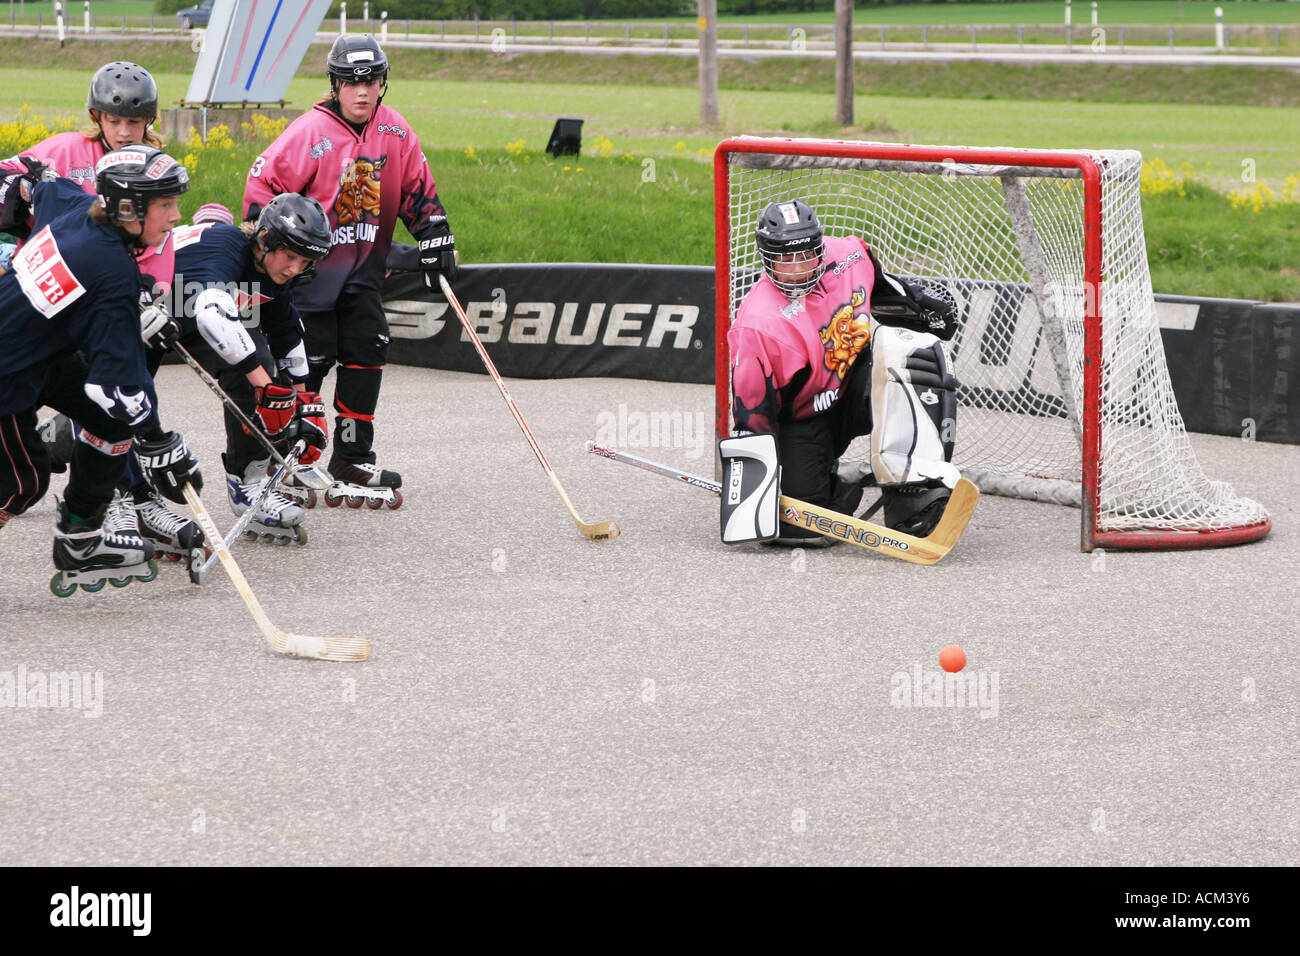 Kids playing street hockey on asphalt with inlines, hockey sticks and a ball Stock Photo